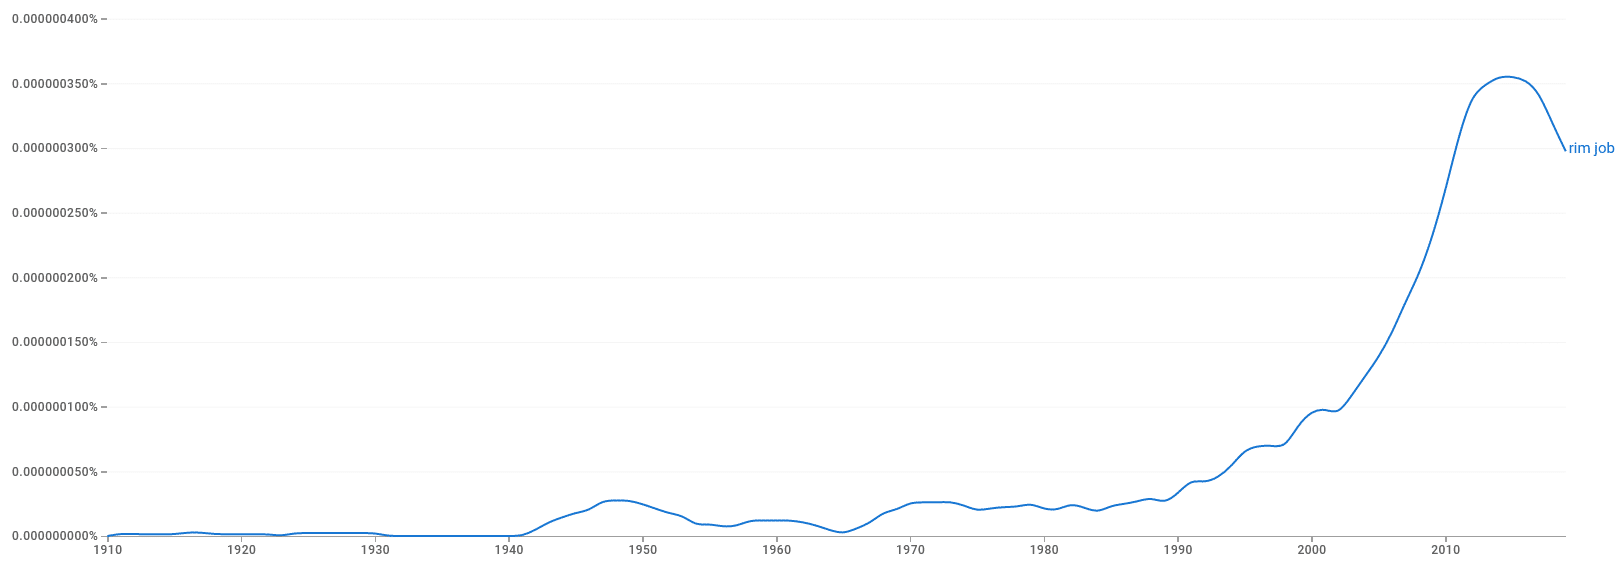 how popular the word rim job has been from the 1900s to today